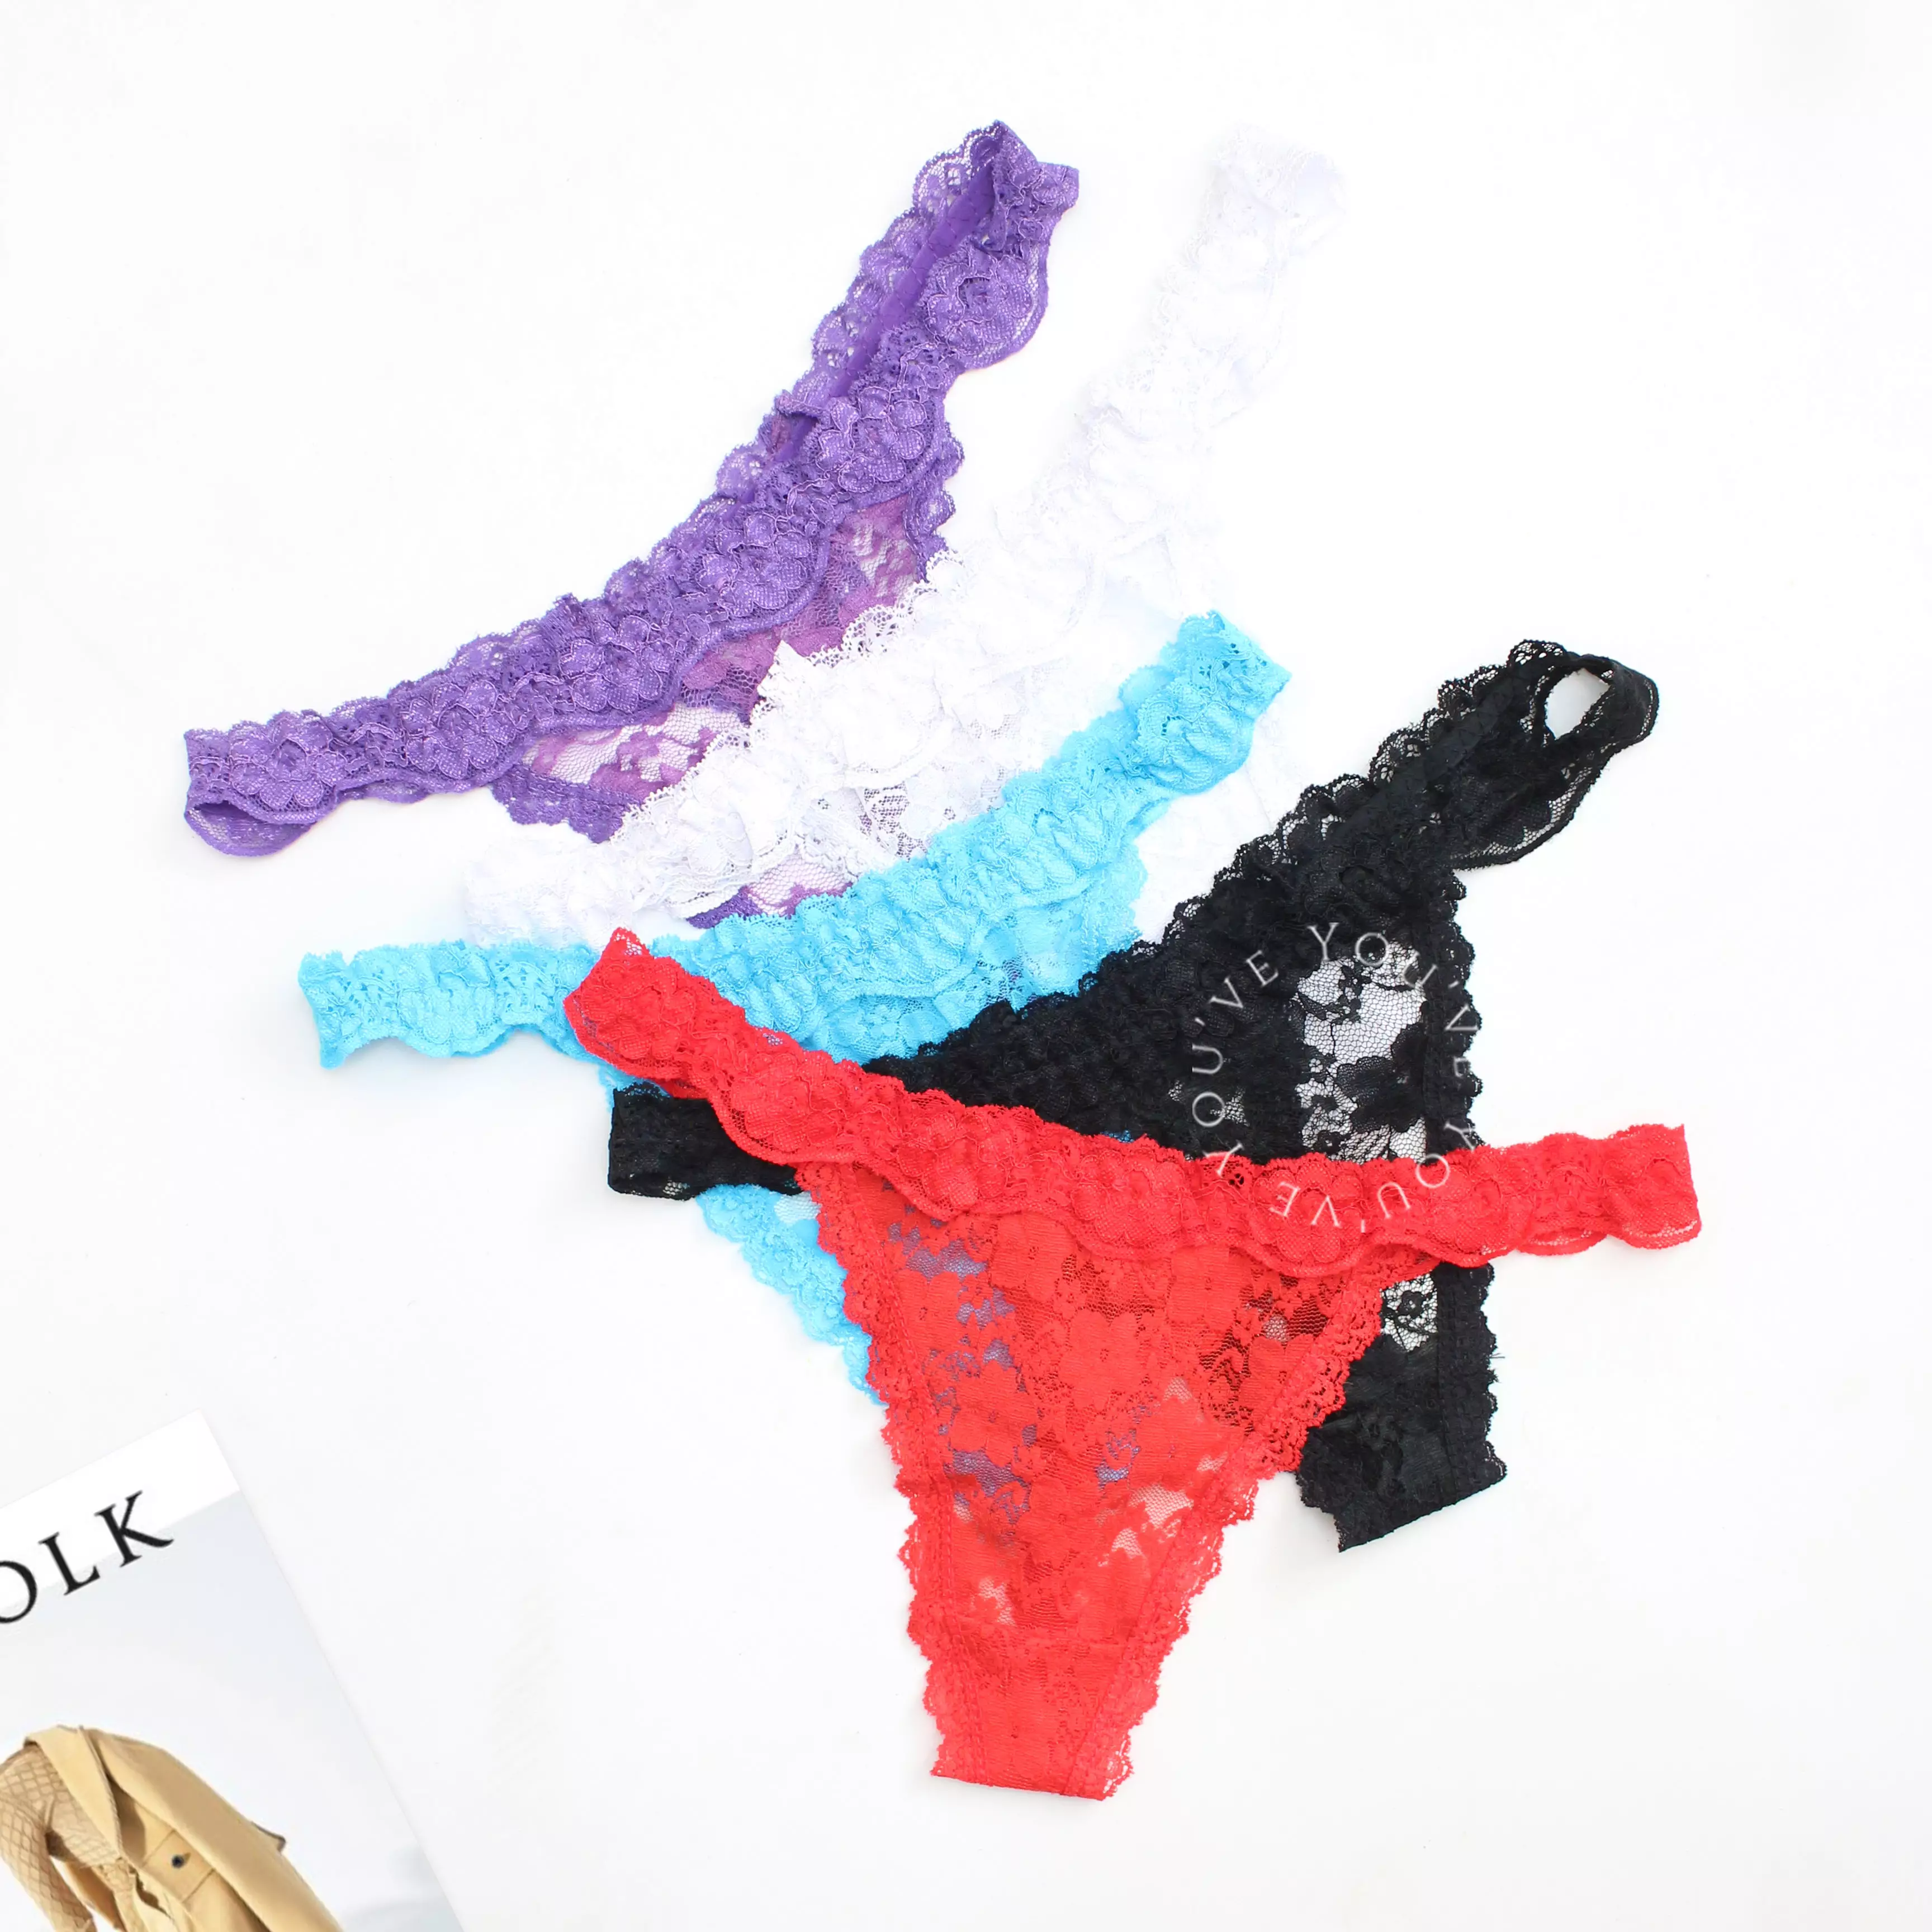 Jual Youhave You've (You Have) Celana Dalam Gstring Thong T Panty